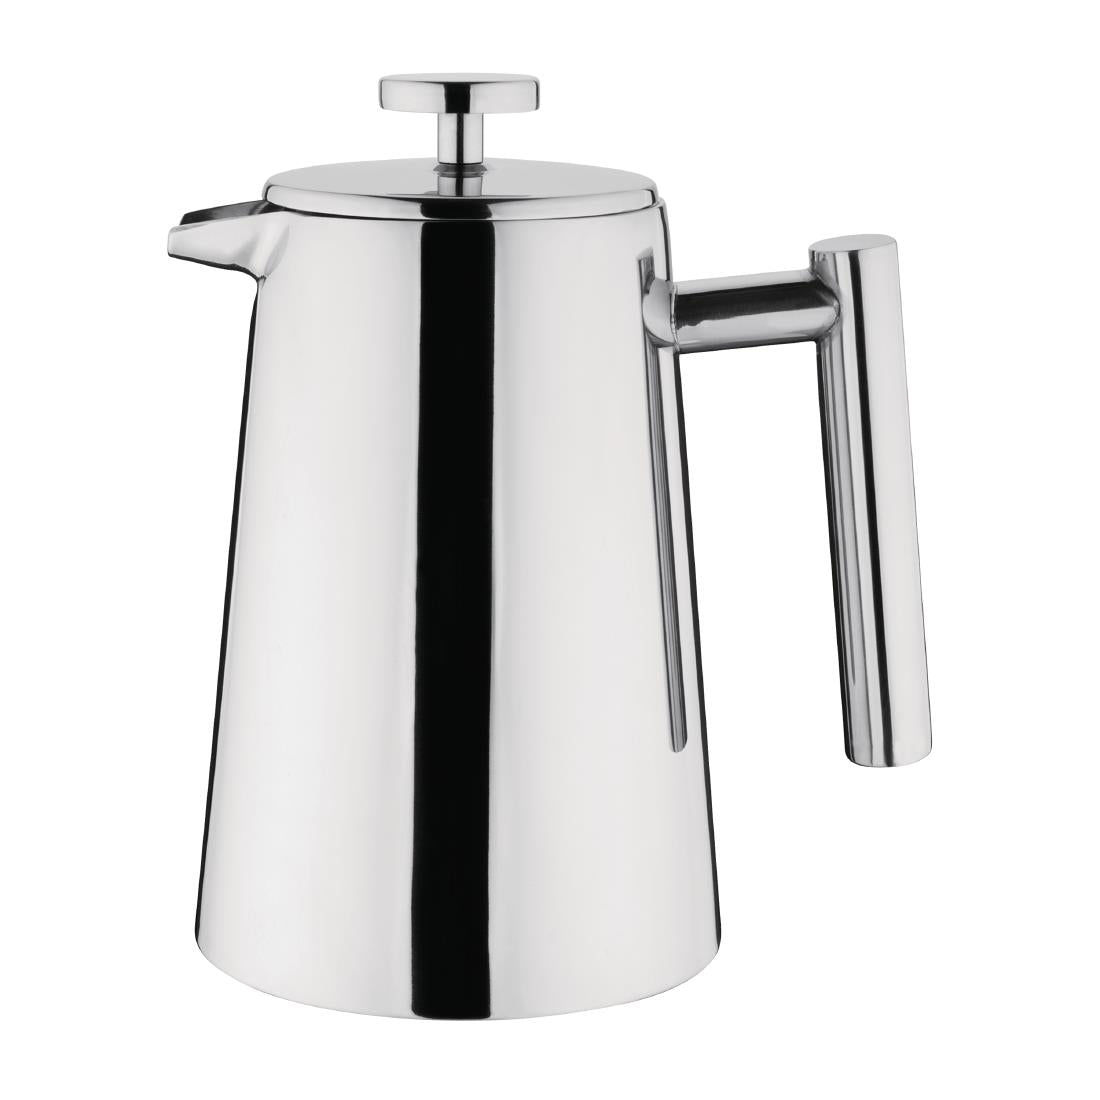 U073 Olympia Insulated Art Deco Stainless Steel Cafetiere 6 Cup